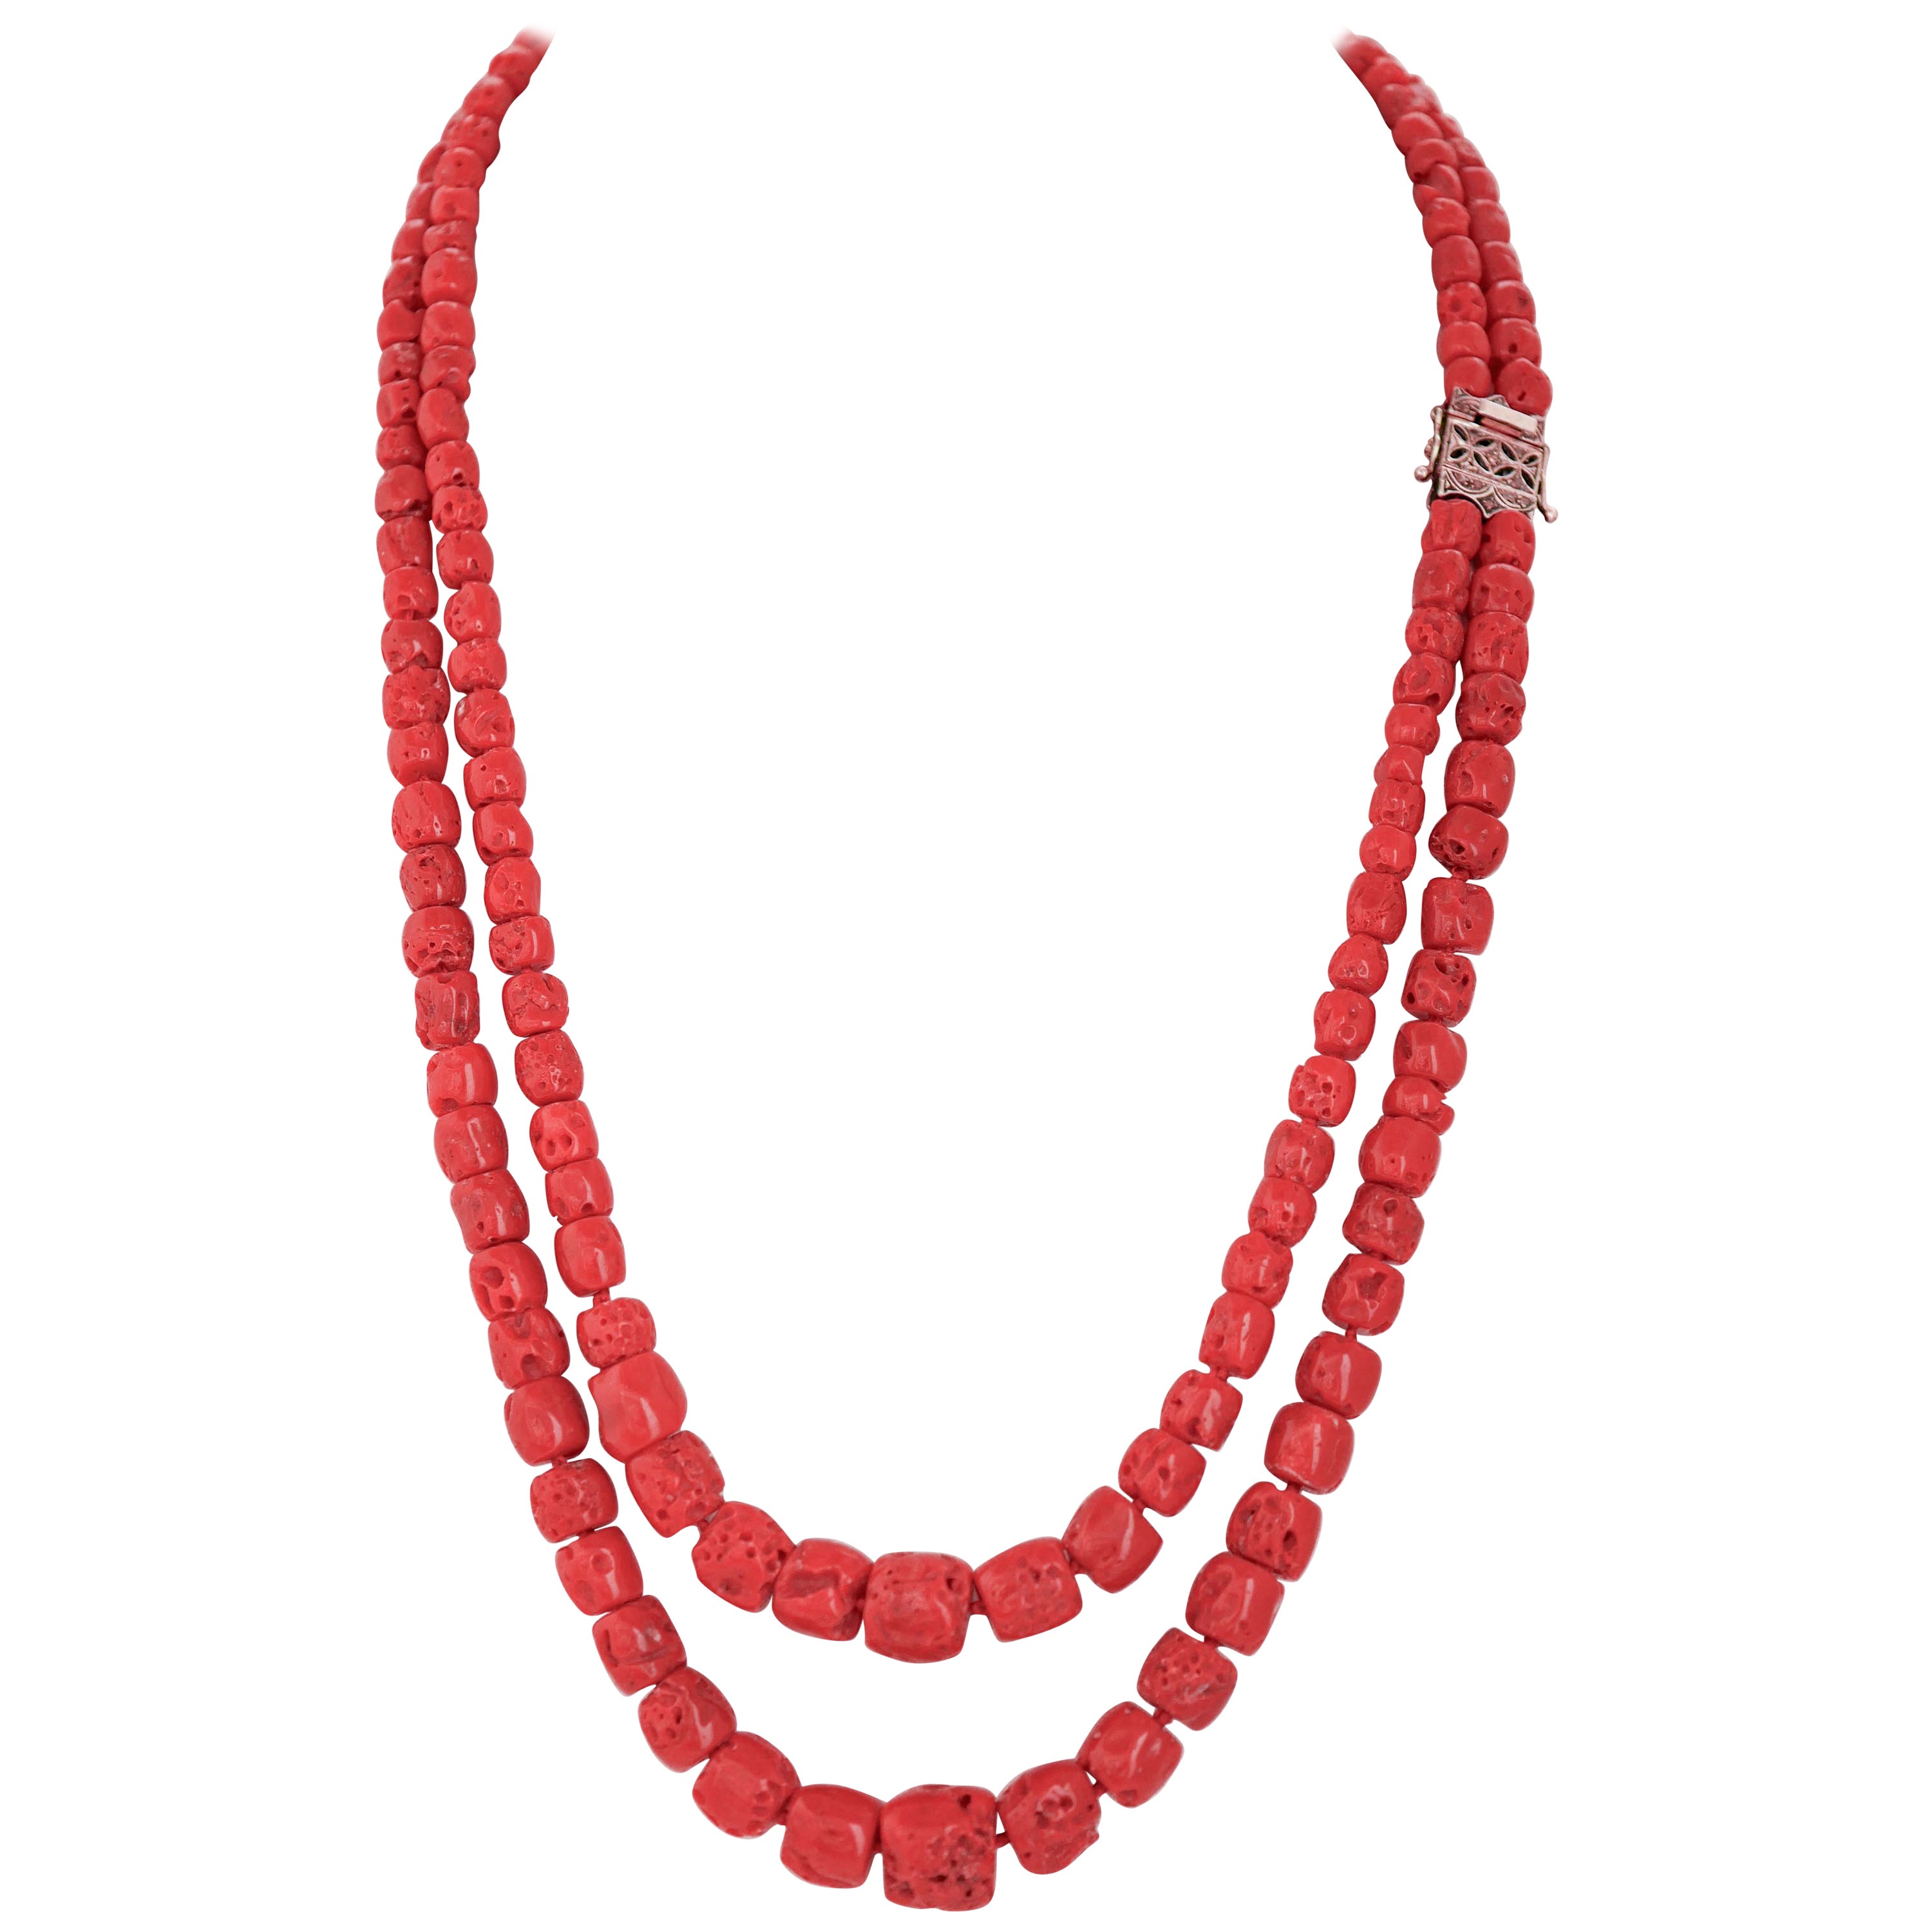 Coral, Diamonds, Rose Gold and Silver Necklace.